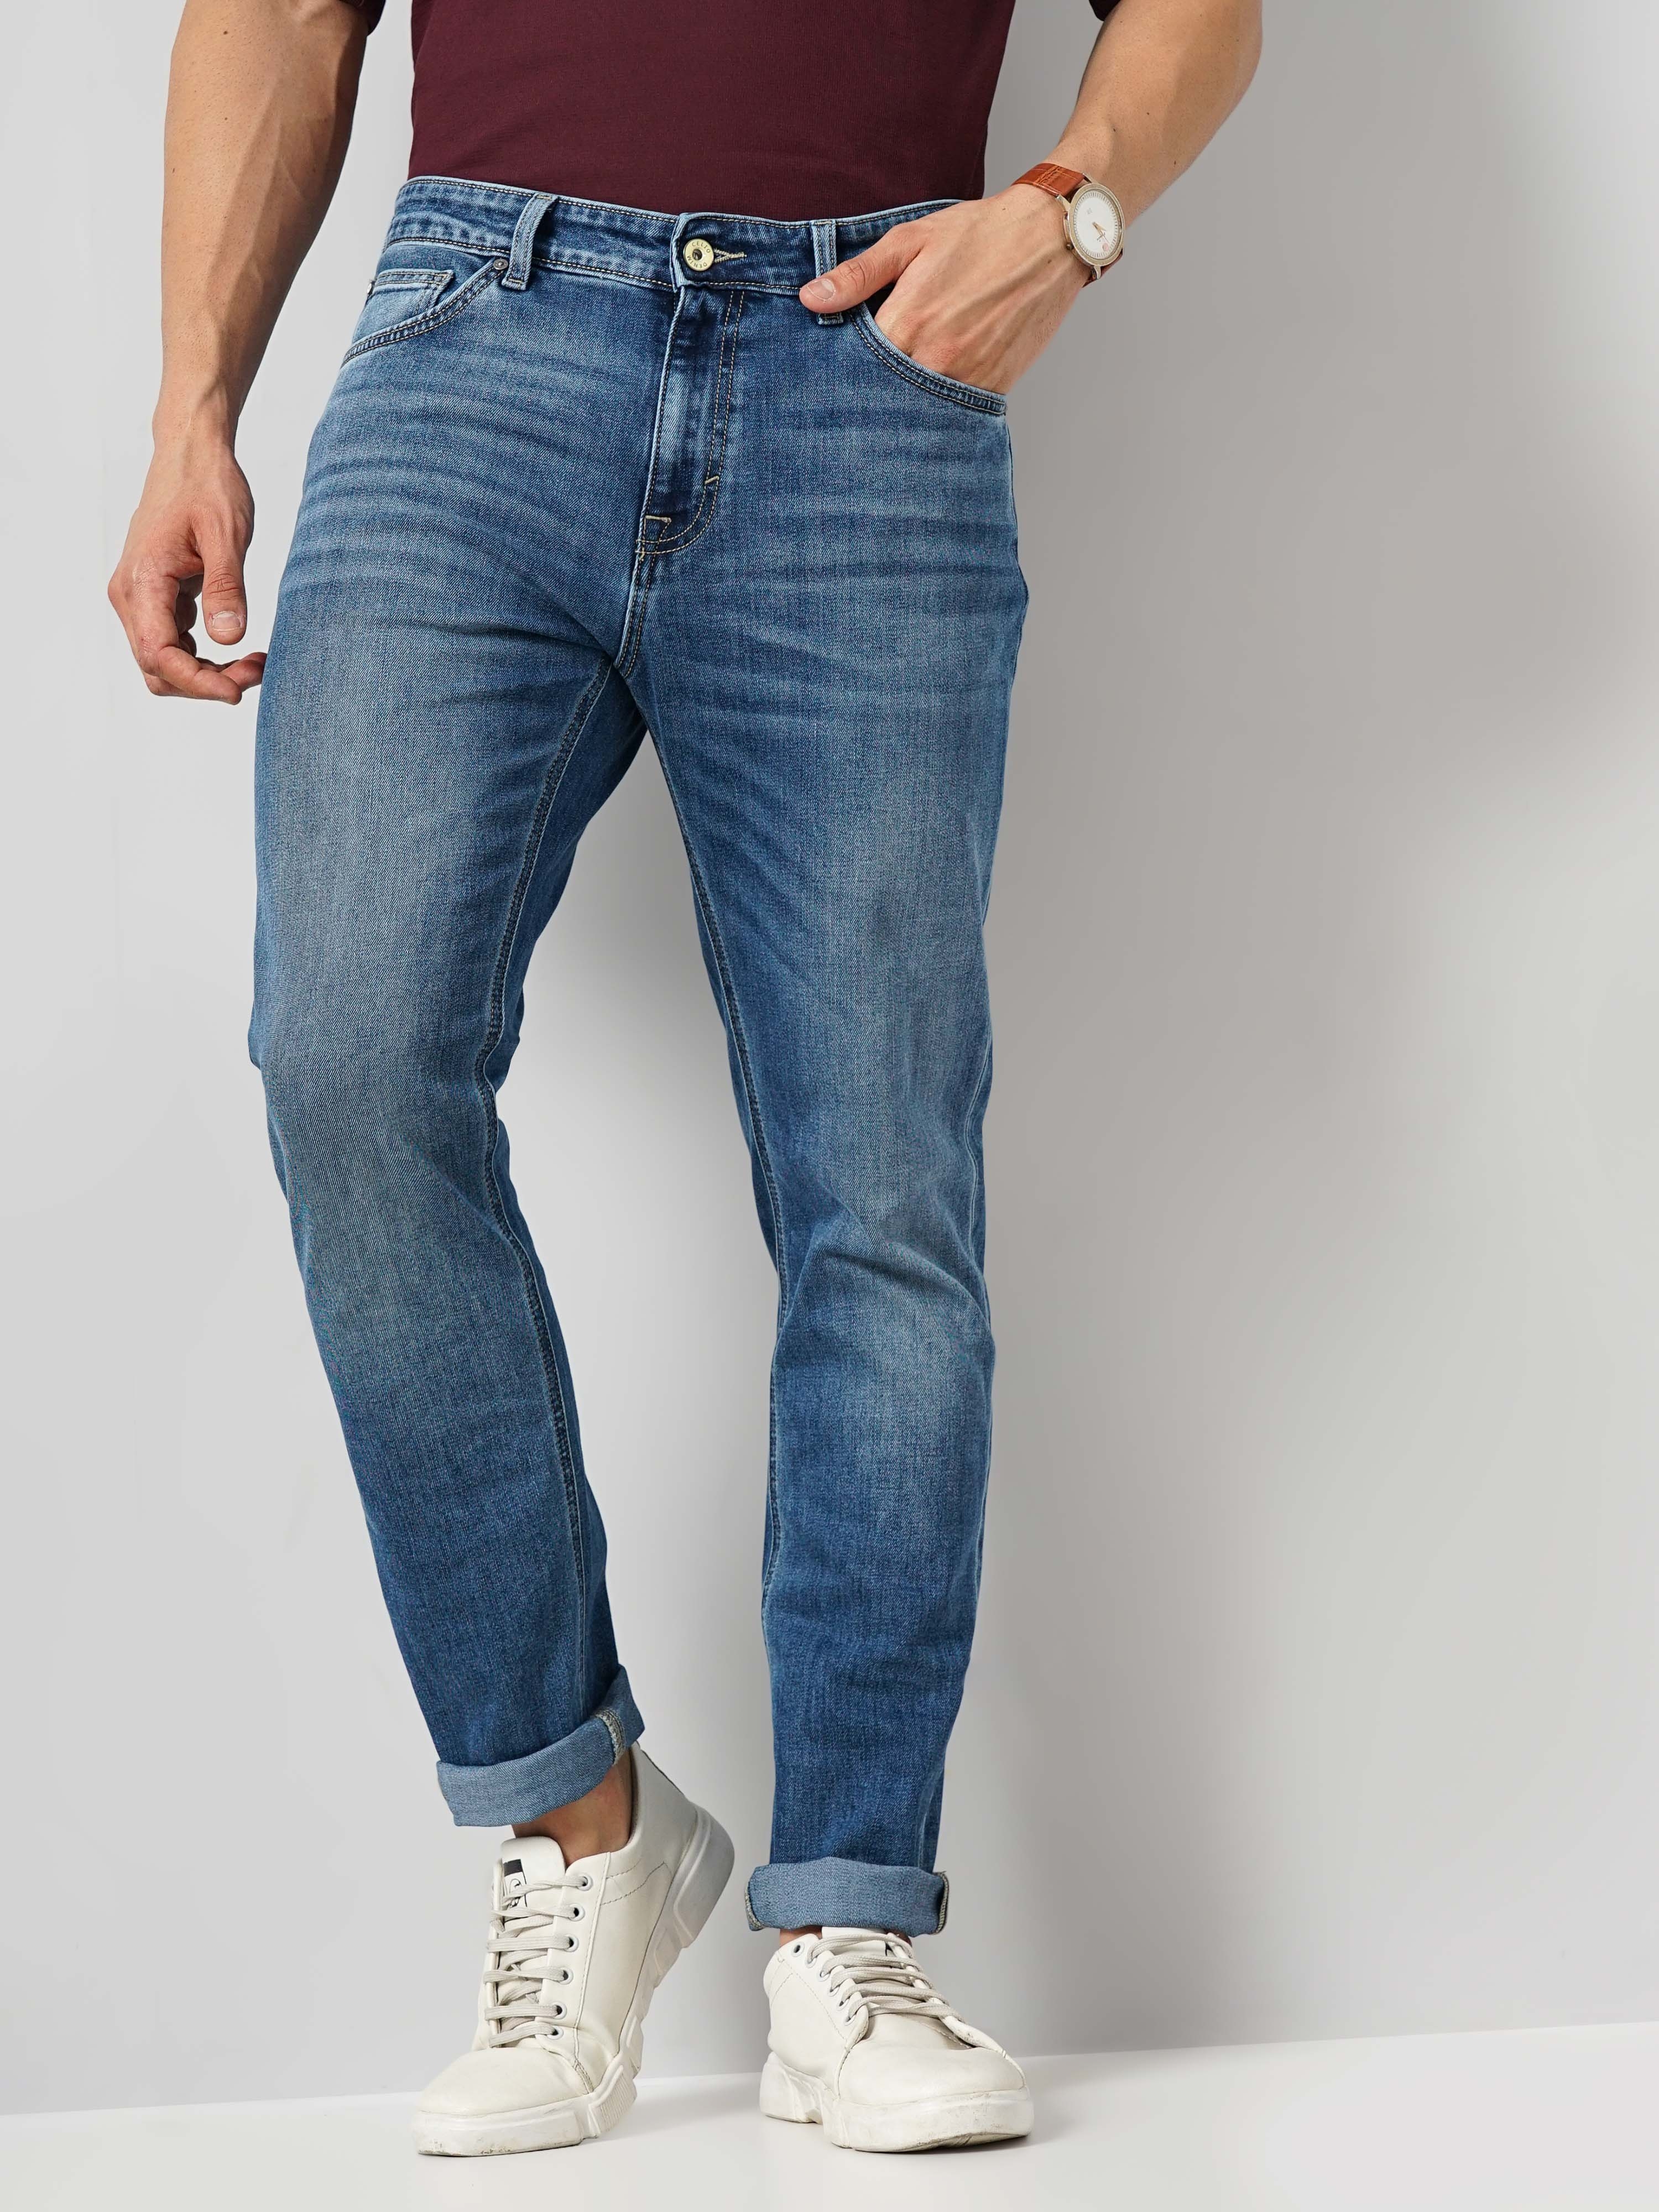 Men's Solid Ankle Length Jeans